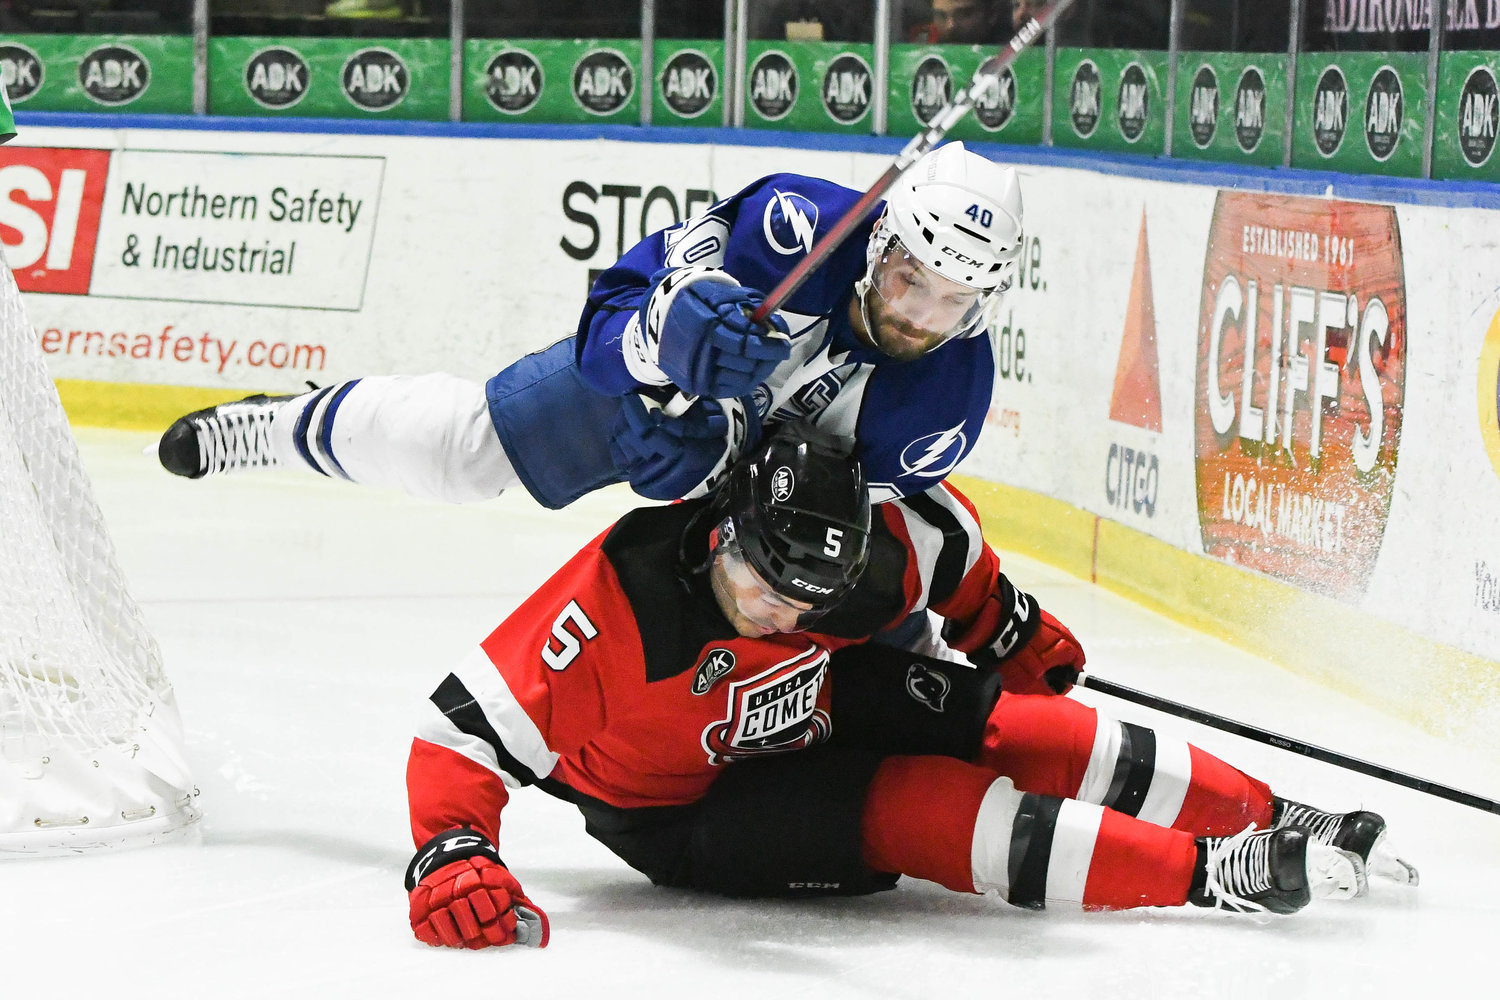 CRUNCH TIME — Defenseman Robbie Russo (5) and the Utica Comets, who have locked up one of the five North Division playoff spots, are set to meet the visiting rival Syracuse Crunch for the final regulation matchup at 7 p.m. Friday. Utica is 10-1-2-0 this season against Syracuse, which is battling for one of the other playoff spots.